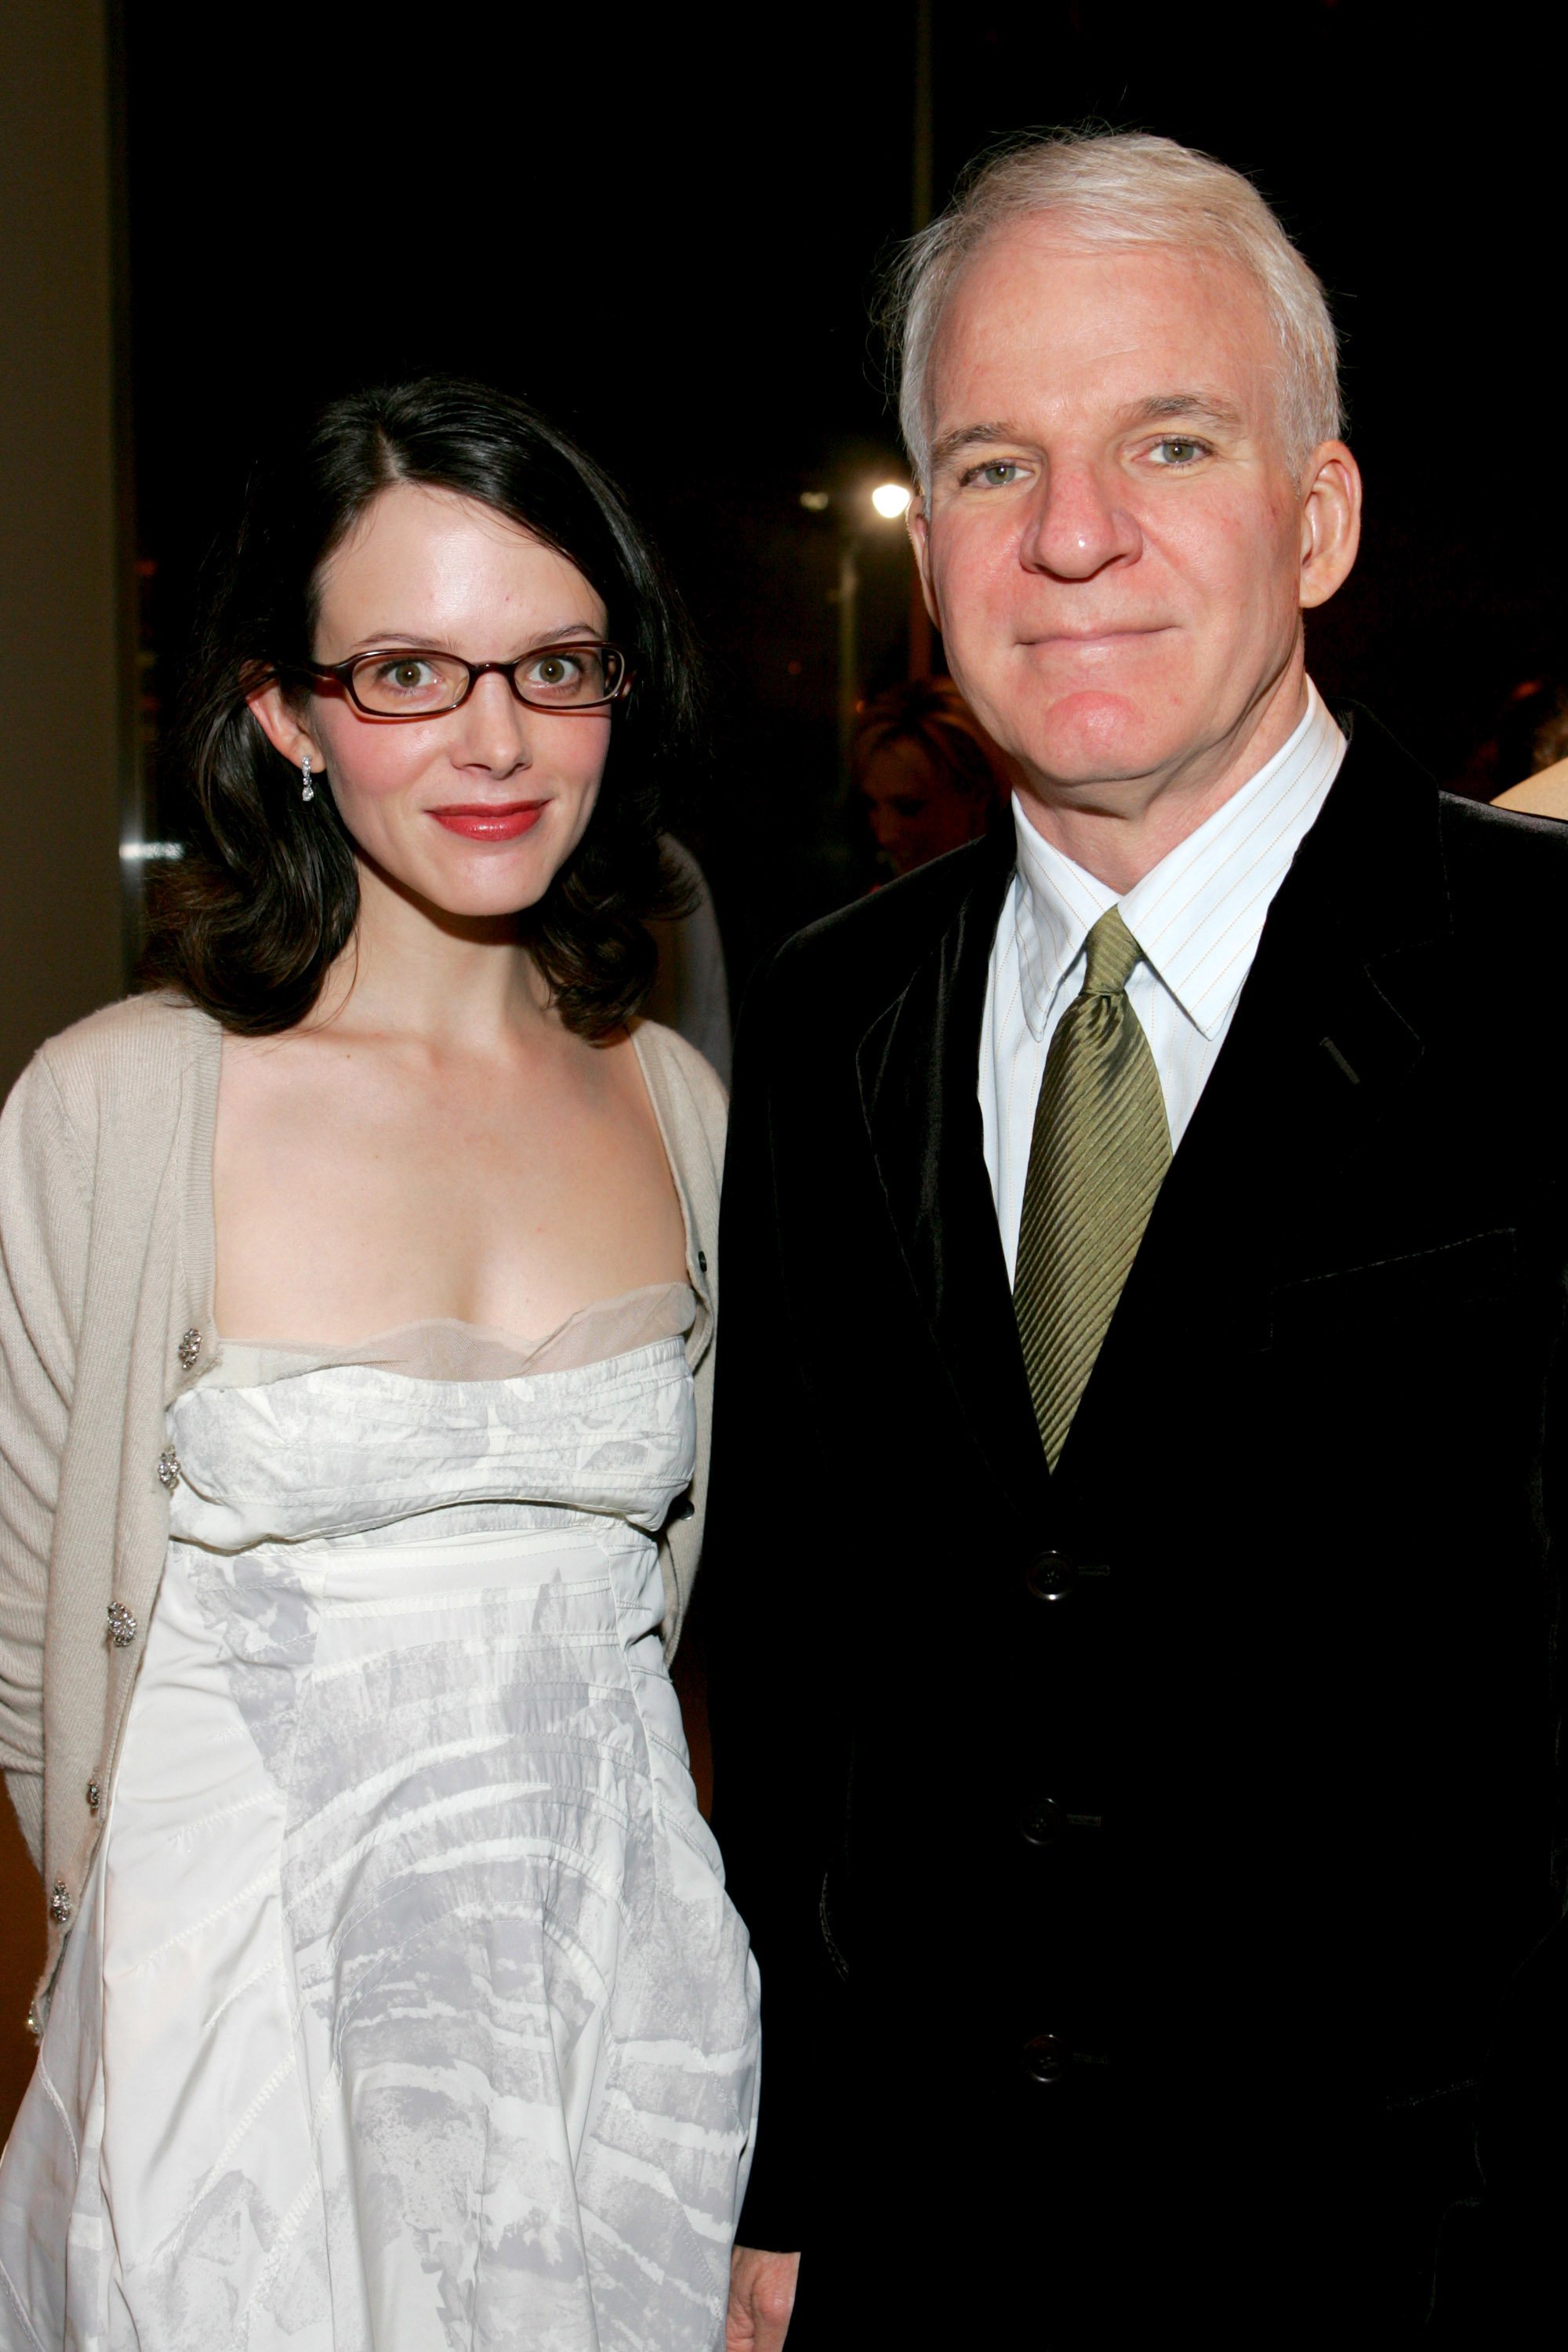 Anne Stringfield and Steve Martin at the 3rd Annual Hammer Museum Gala in the Garden Celebrates the Achievements of L.A. Artist Ed Ruscha on October 1, 2005 | Source: Getty Images